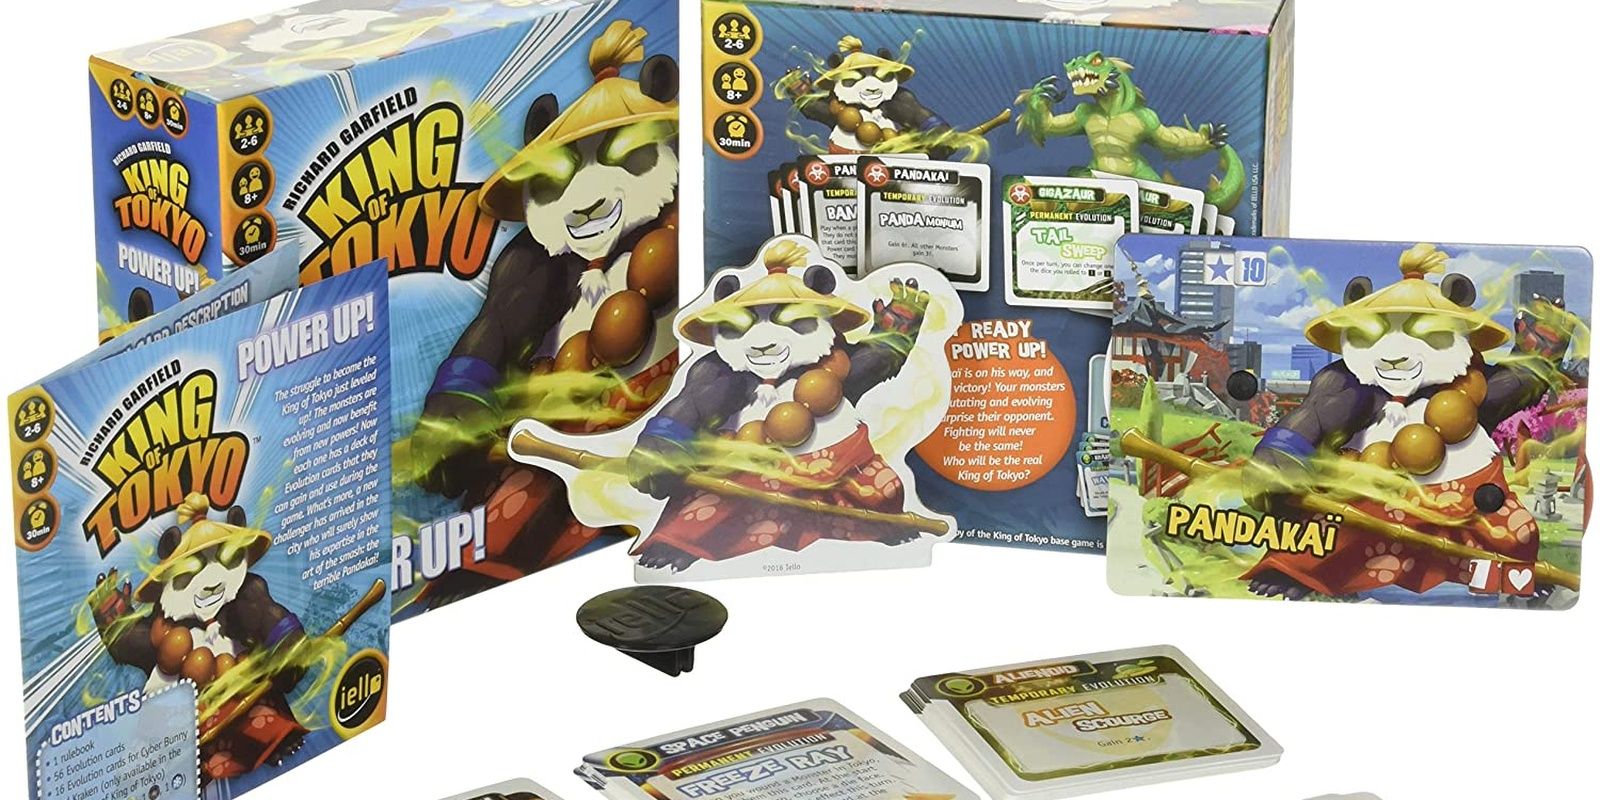 King Of Tokyo Power Up! Board Game Expansion Components And Box